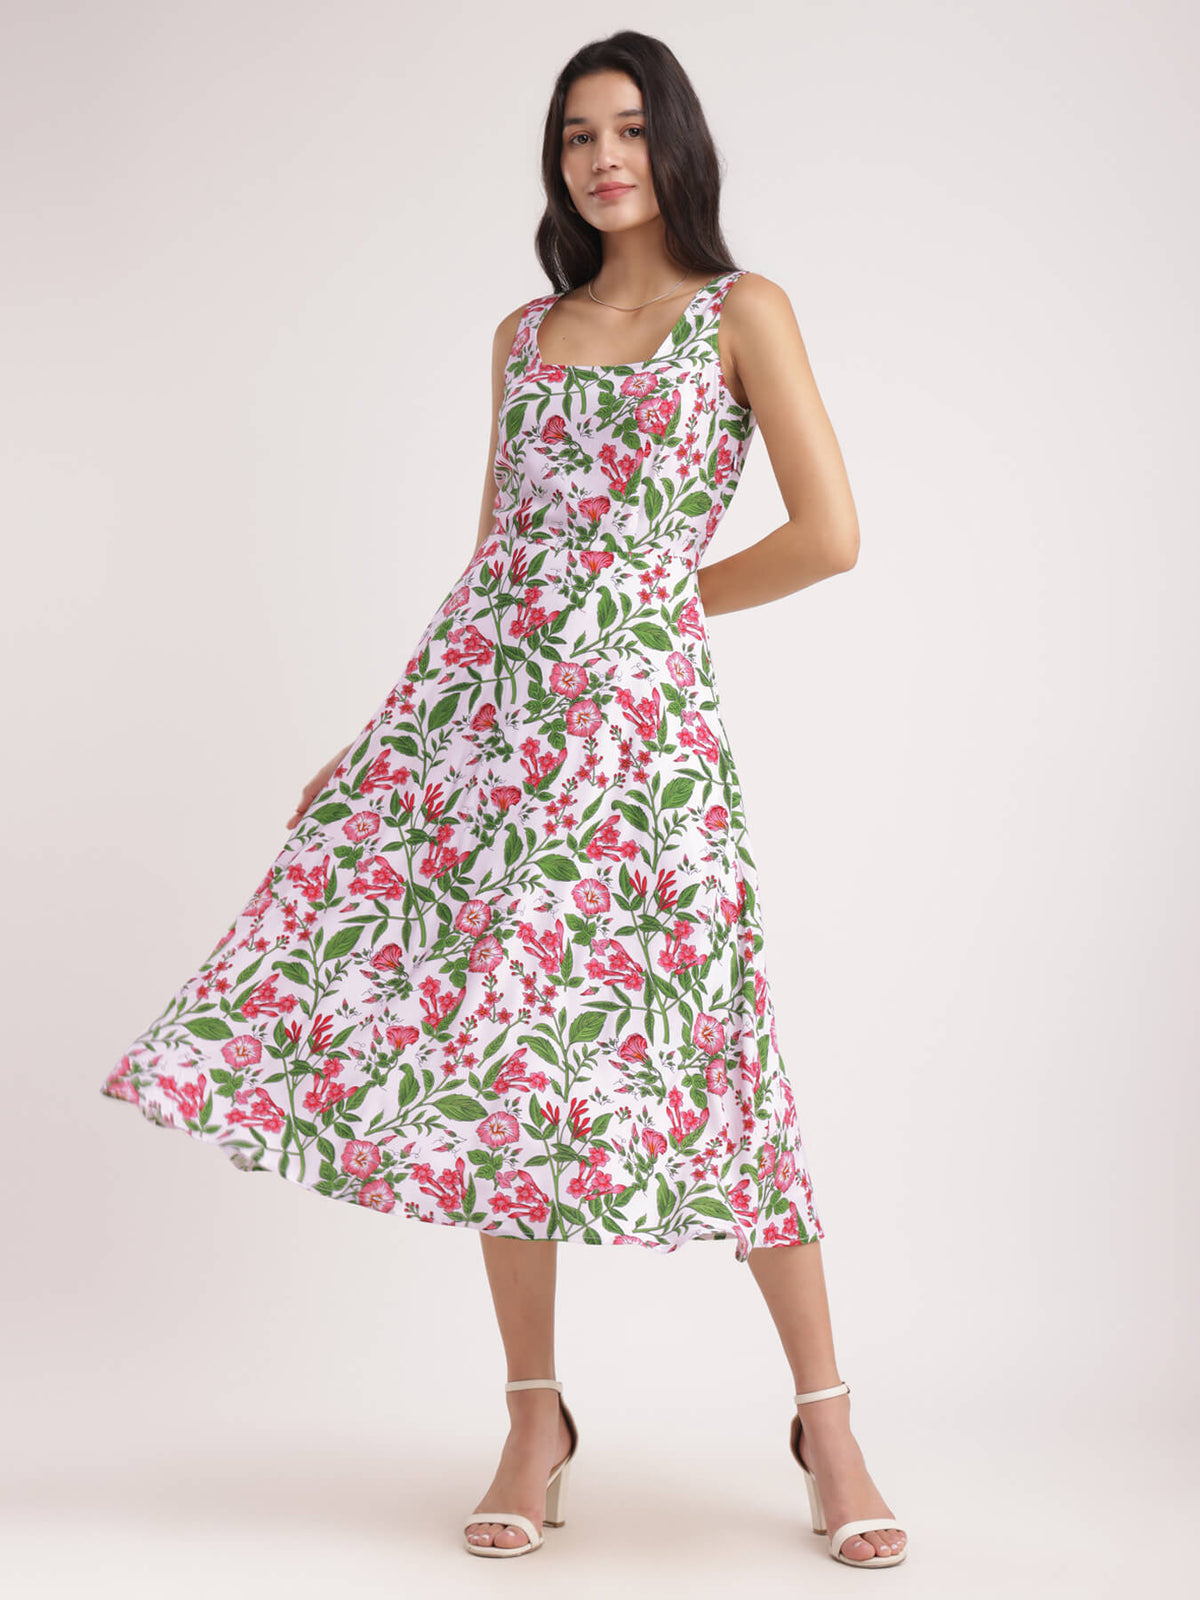 Fit And Flare Floral Dress - White And Pink